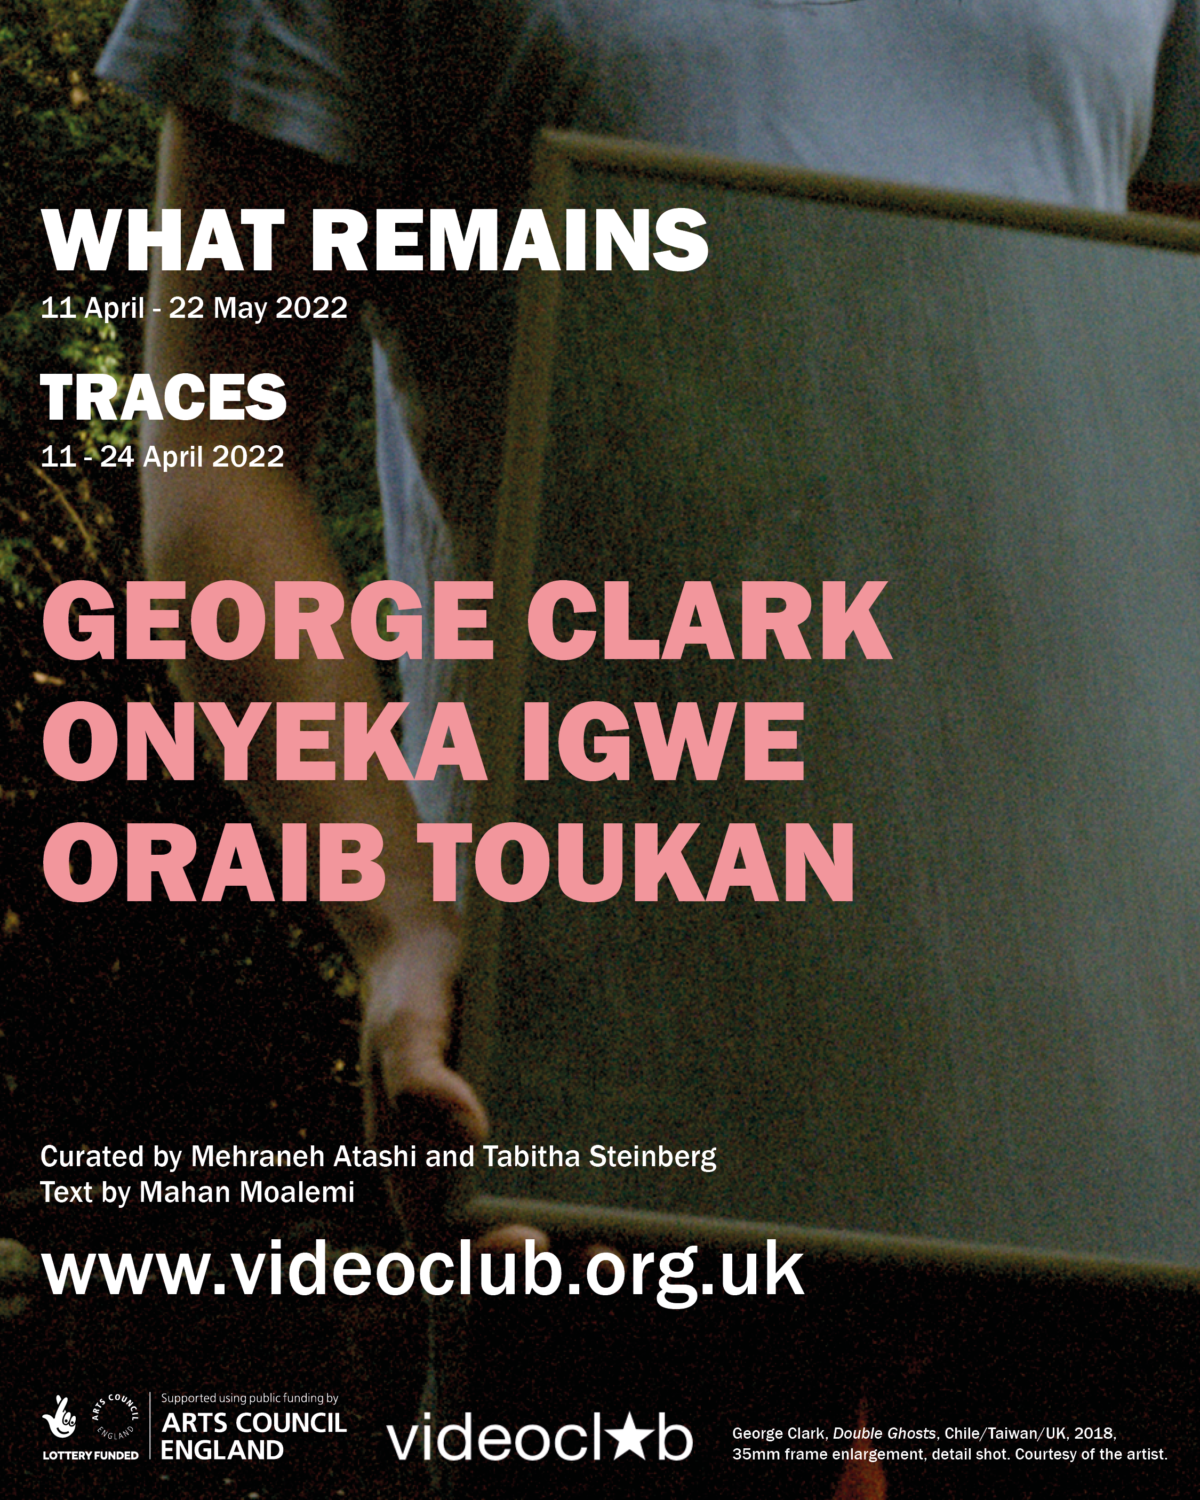 Poster for 'What Remains - Part 1: Traces' 11-24 April 2022